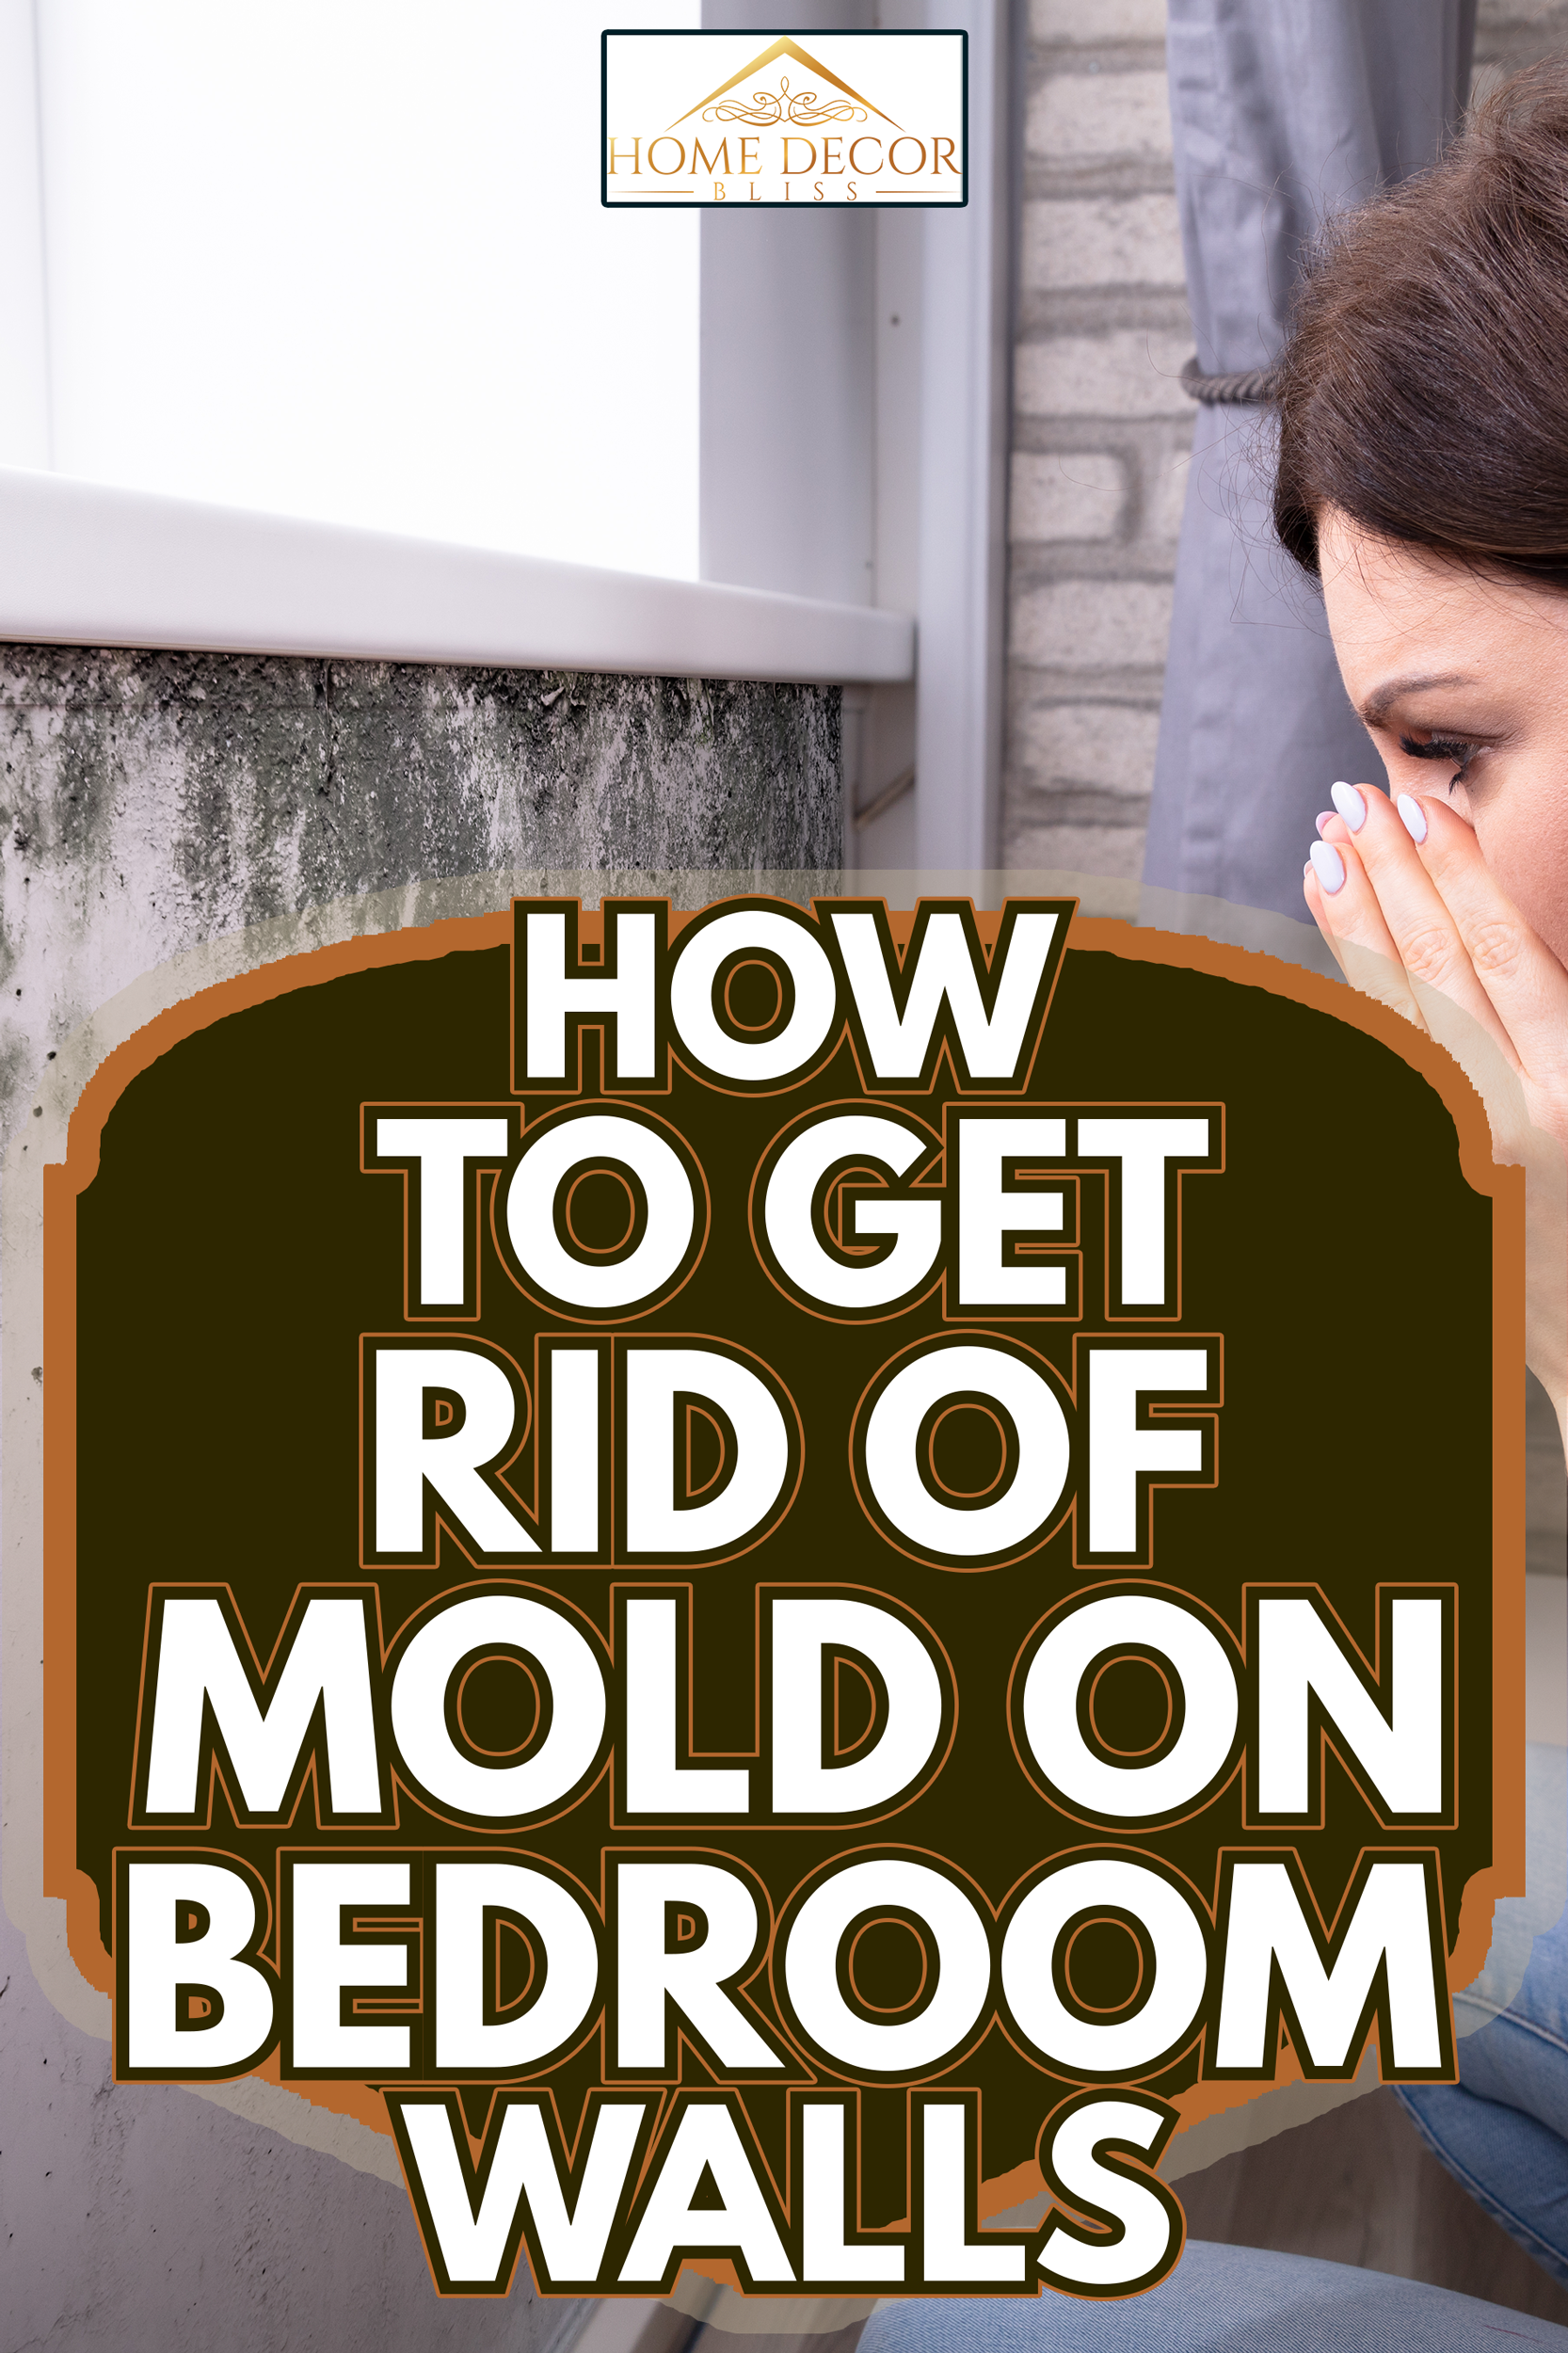 Side View Of A Shocked Young Woman Looking At Mold On Wall - How To Get Rid Of Mold On Bedroom Walls